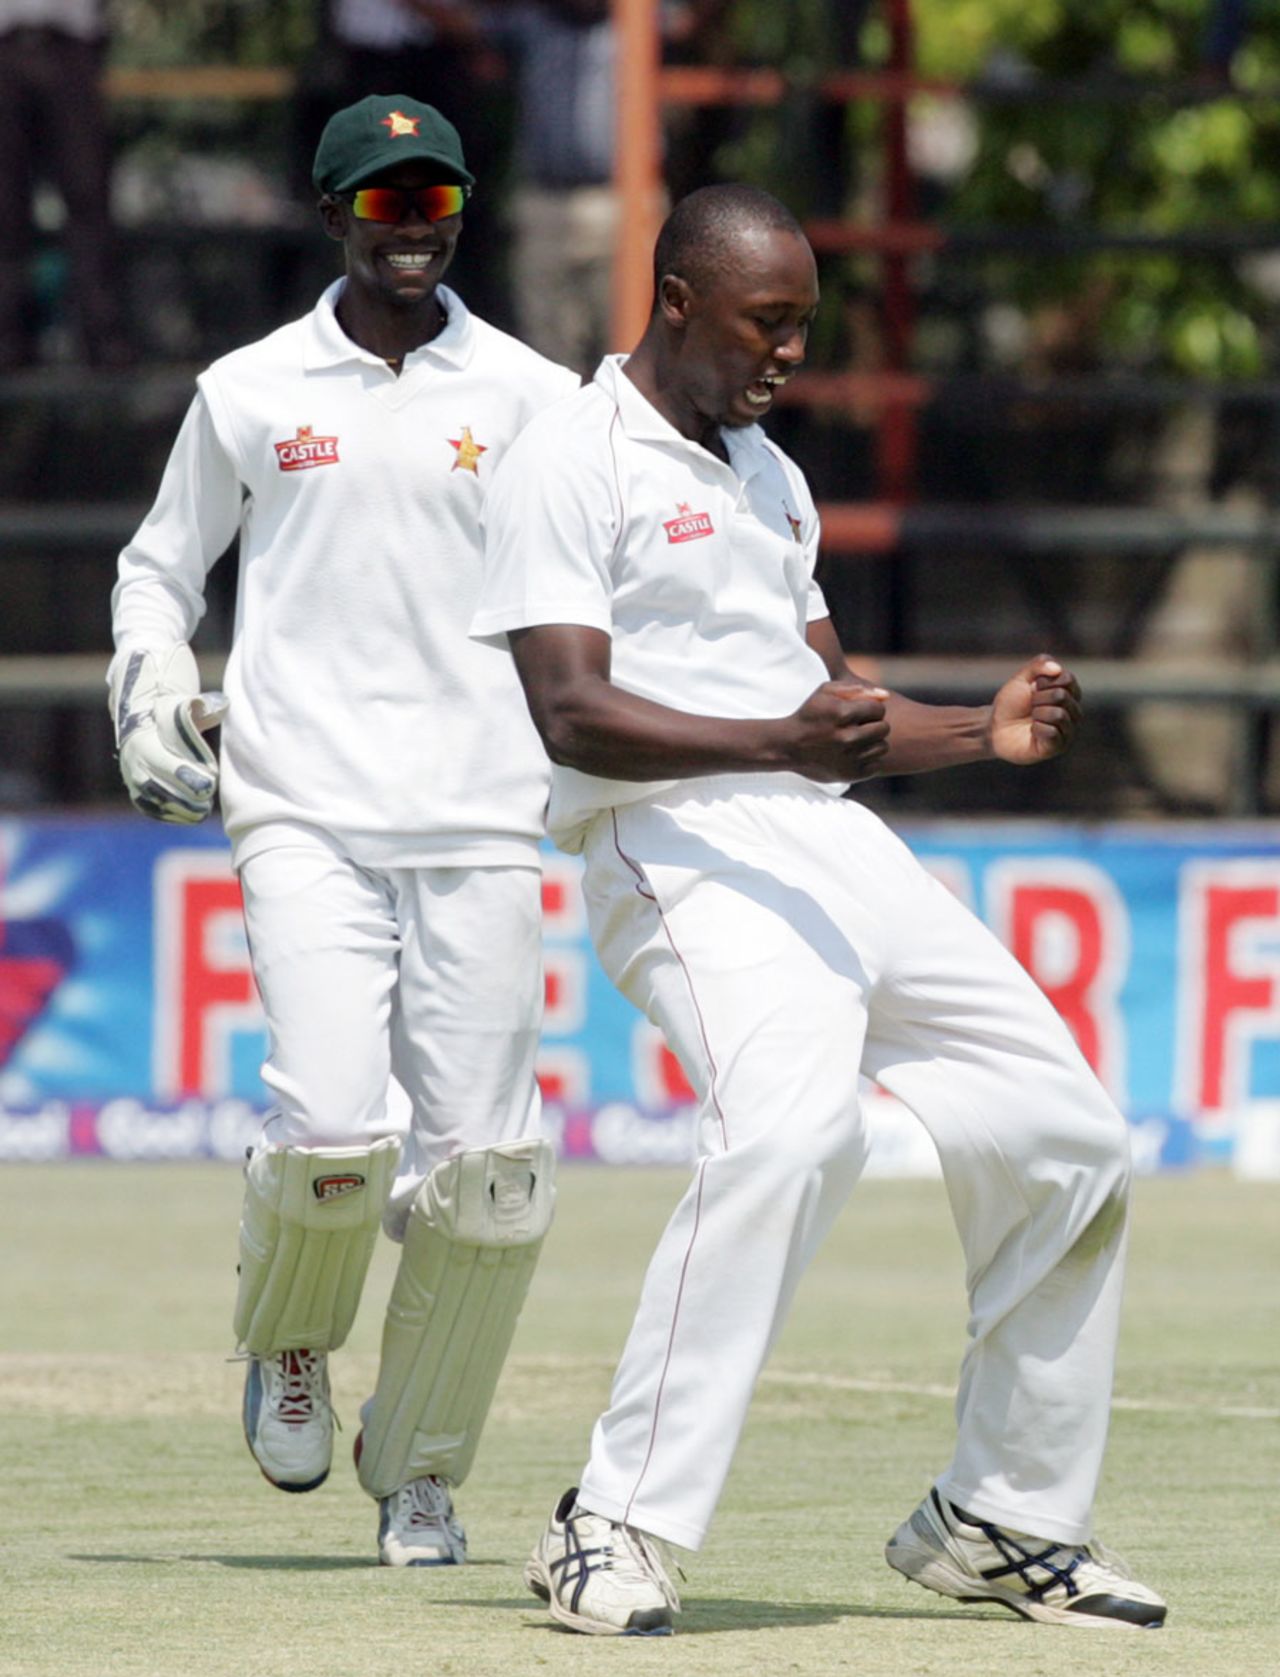 Tendai Chatara is pumped after taking a wicket, Zimbabwe v Pakistan, 2nd Test, Harare, 5th day, September 14, 2013